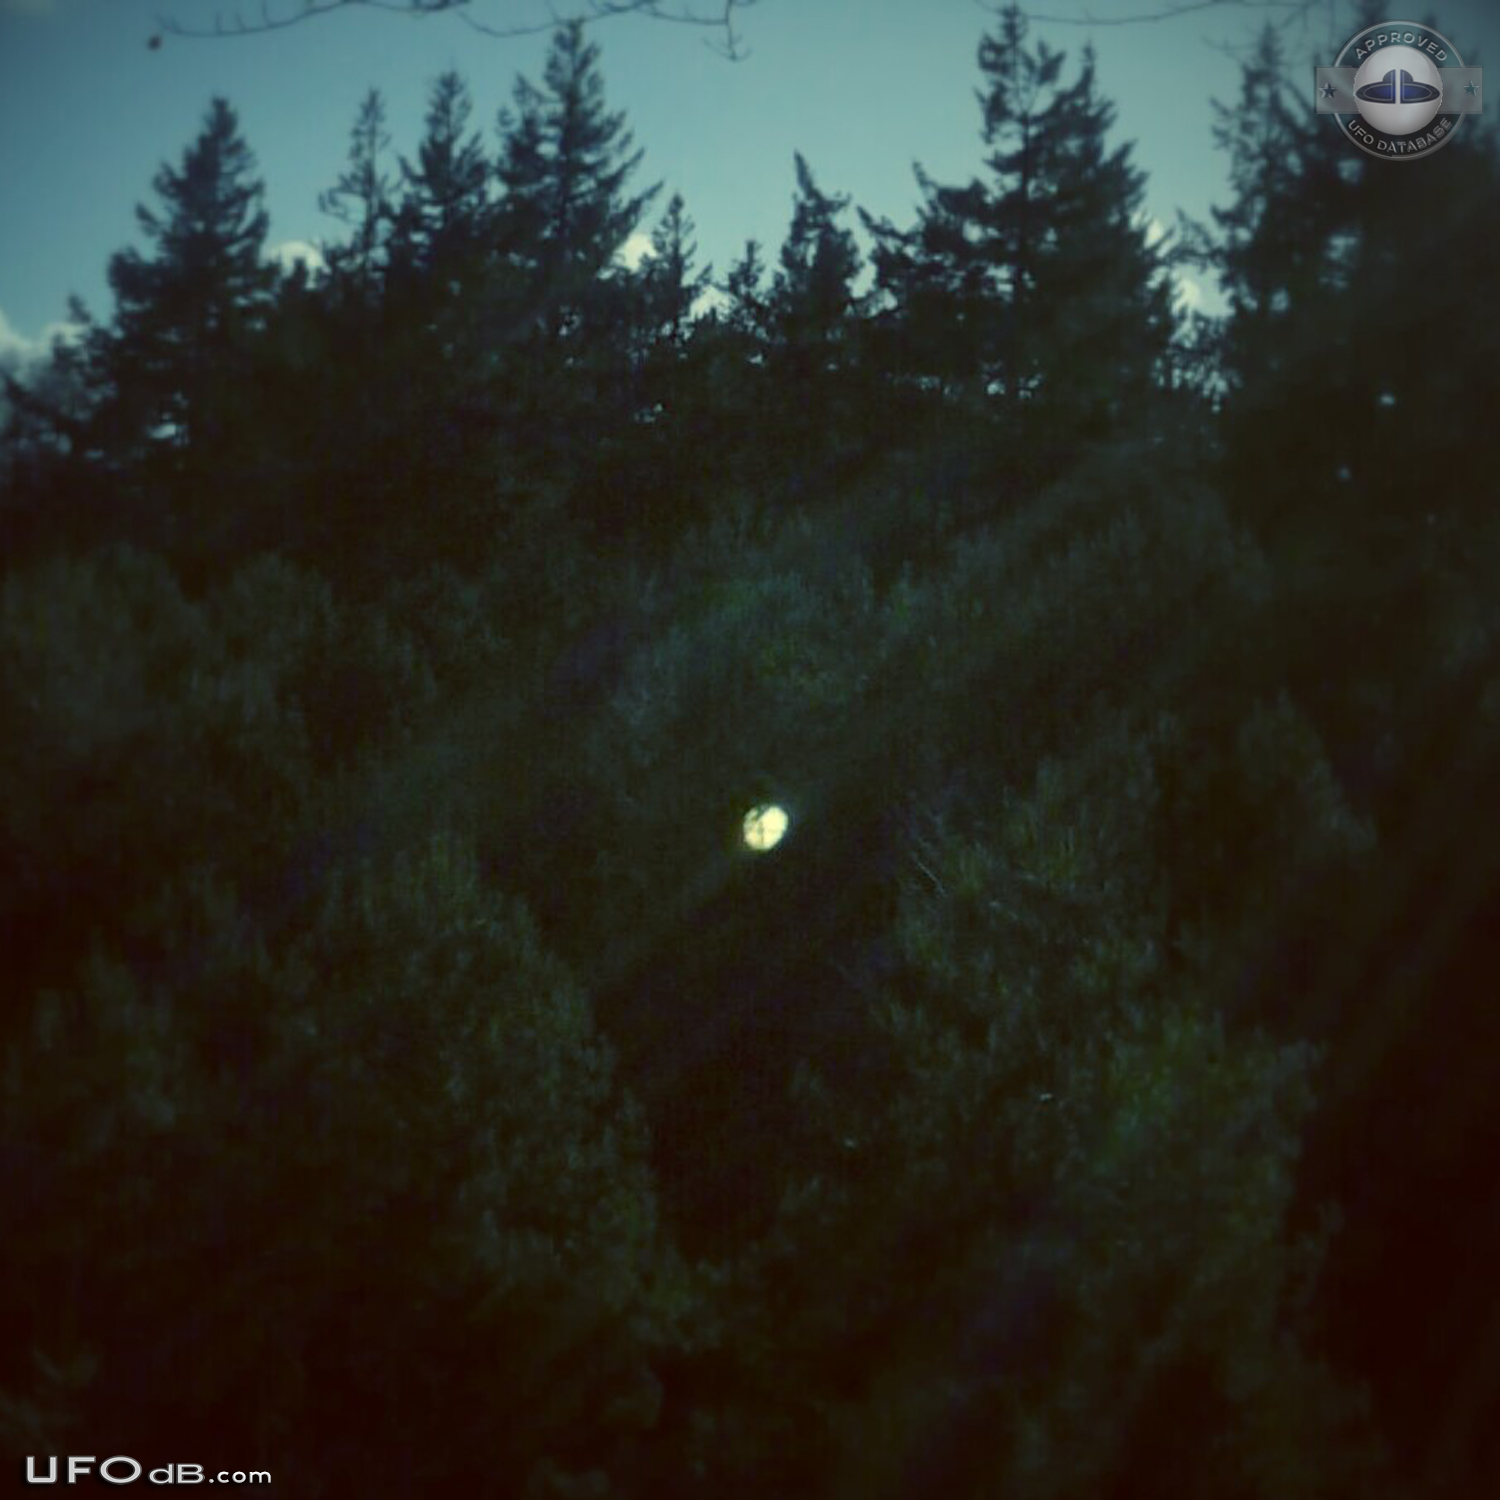 Silent Gold Disc UFO caught on picture - Rhenen, the Netherlands 2014 UFO Picture #572-1